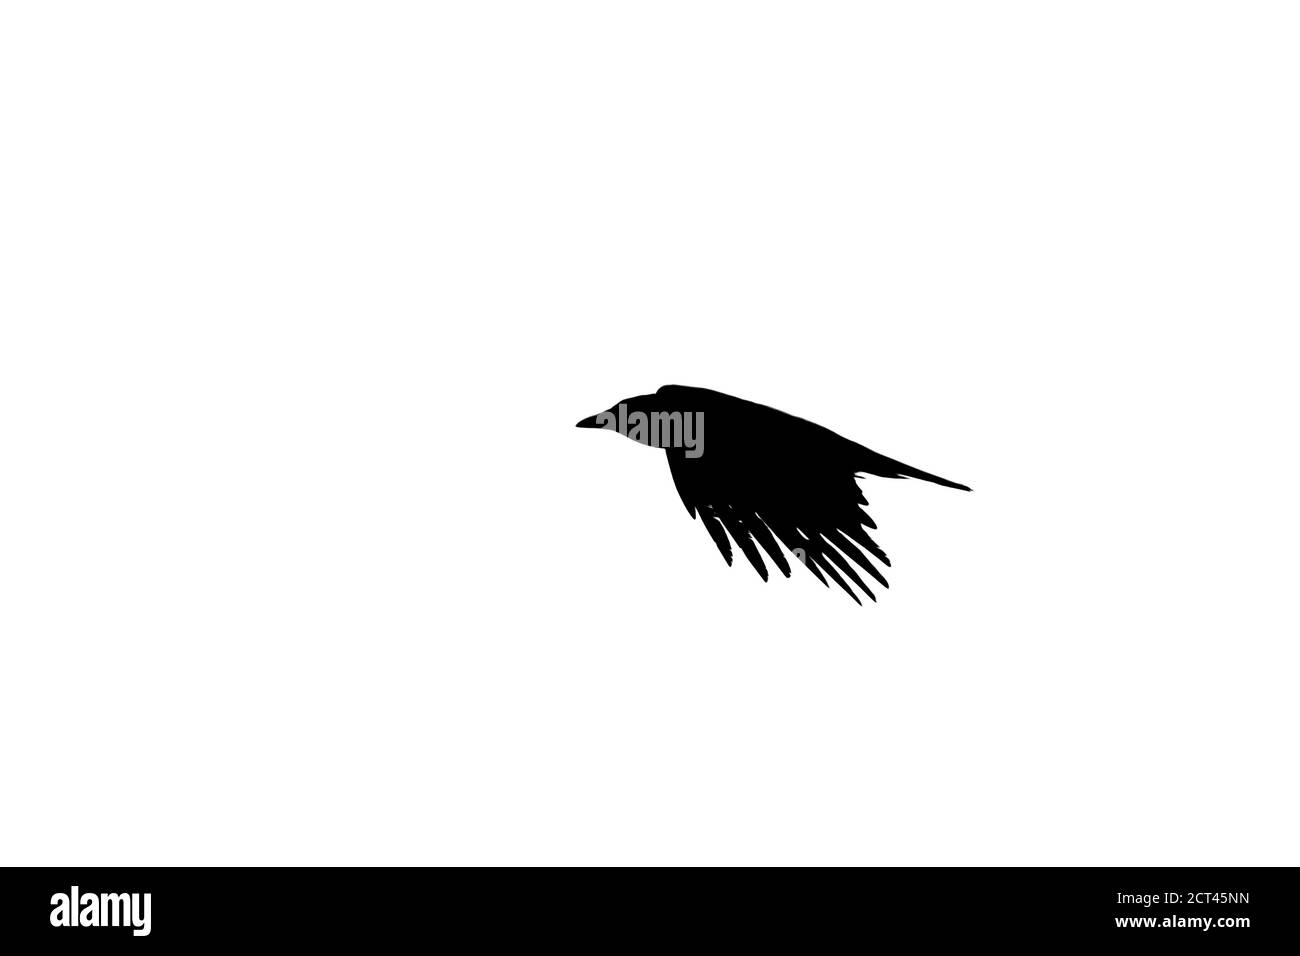 Flying crow silhouette isolated on white background Stock Photo